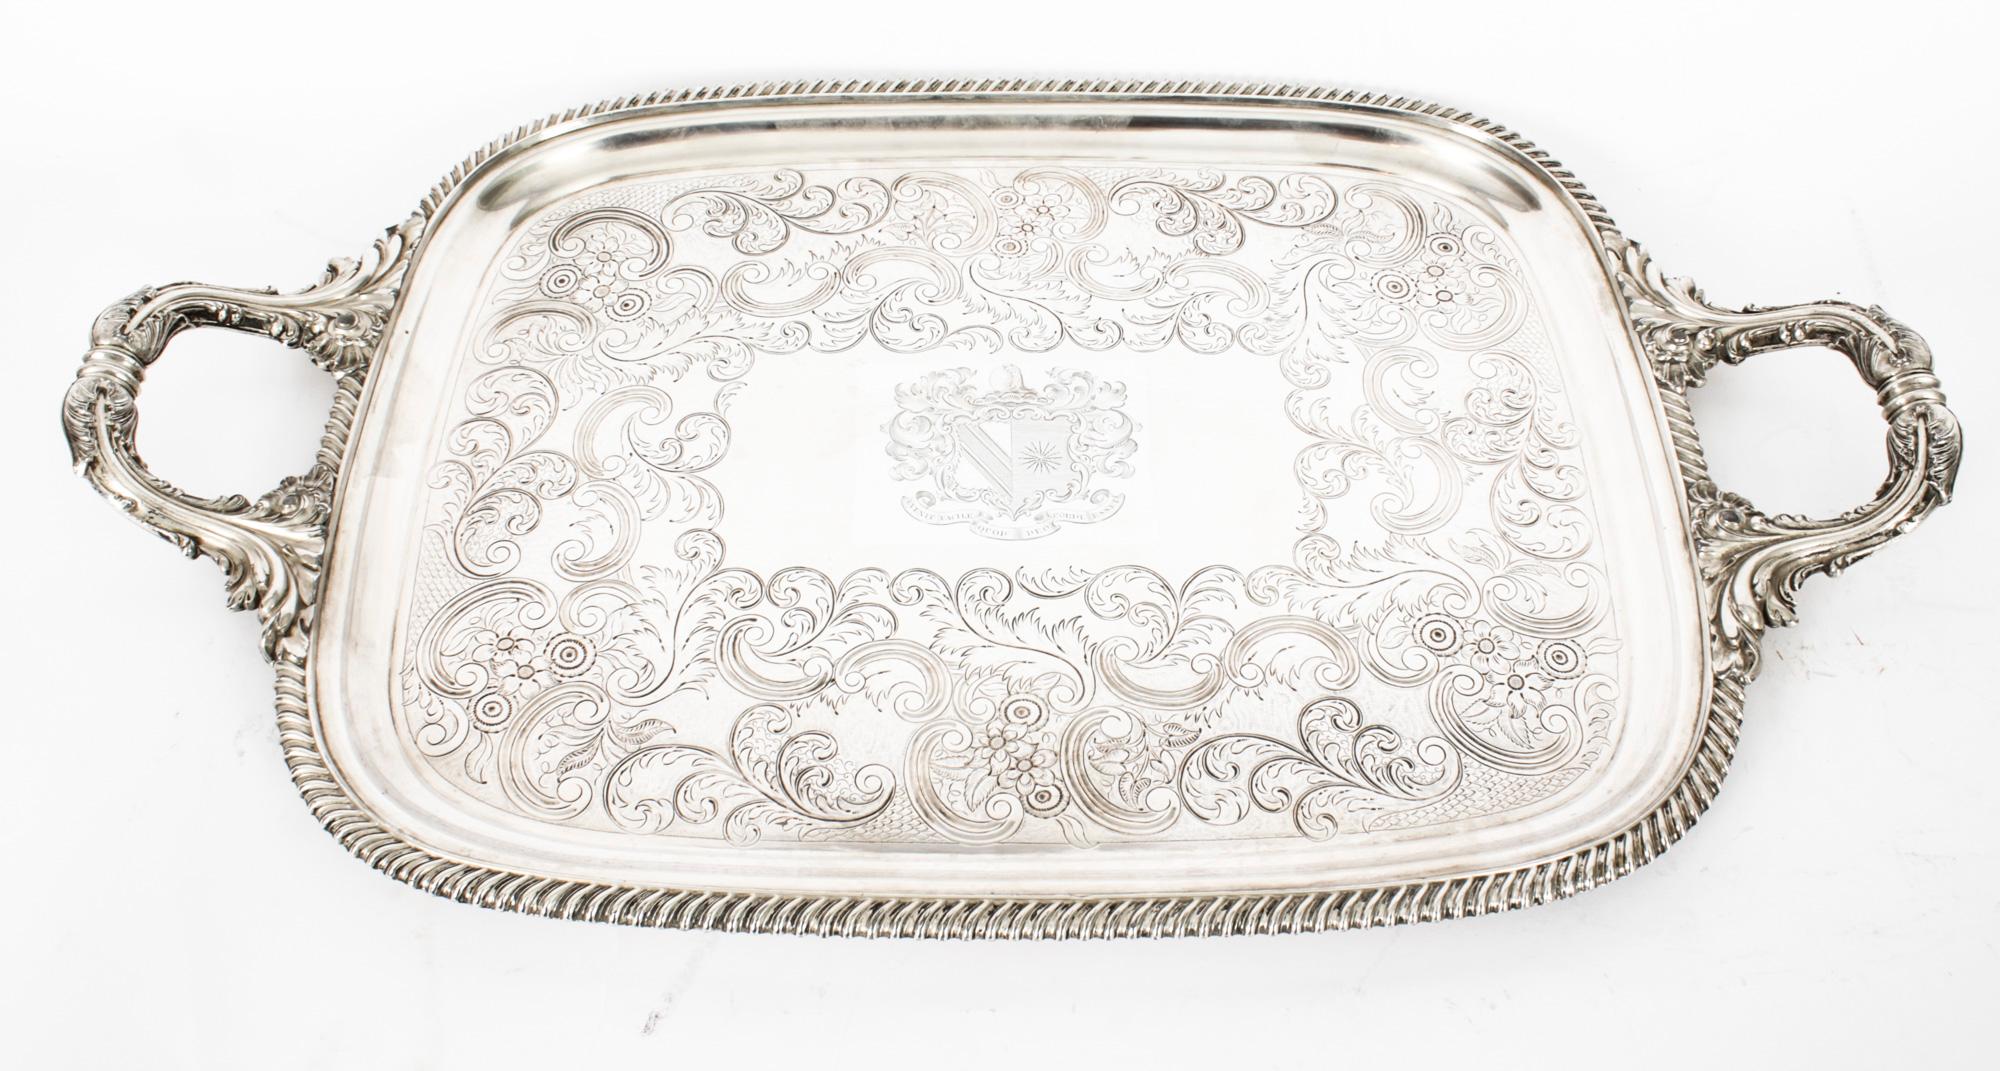 This is a superb antique English Old Sheffield Silver Plate tray Circa 1780 in date.

This rectangular Old Shefield tray features a deep set, decorative gadrooned border with elegant handles decorated with acanthus leaves to each end, superb foliate